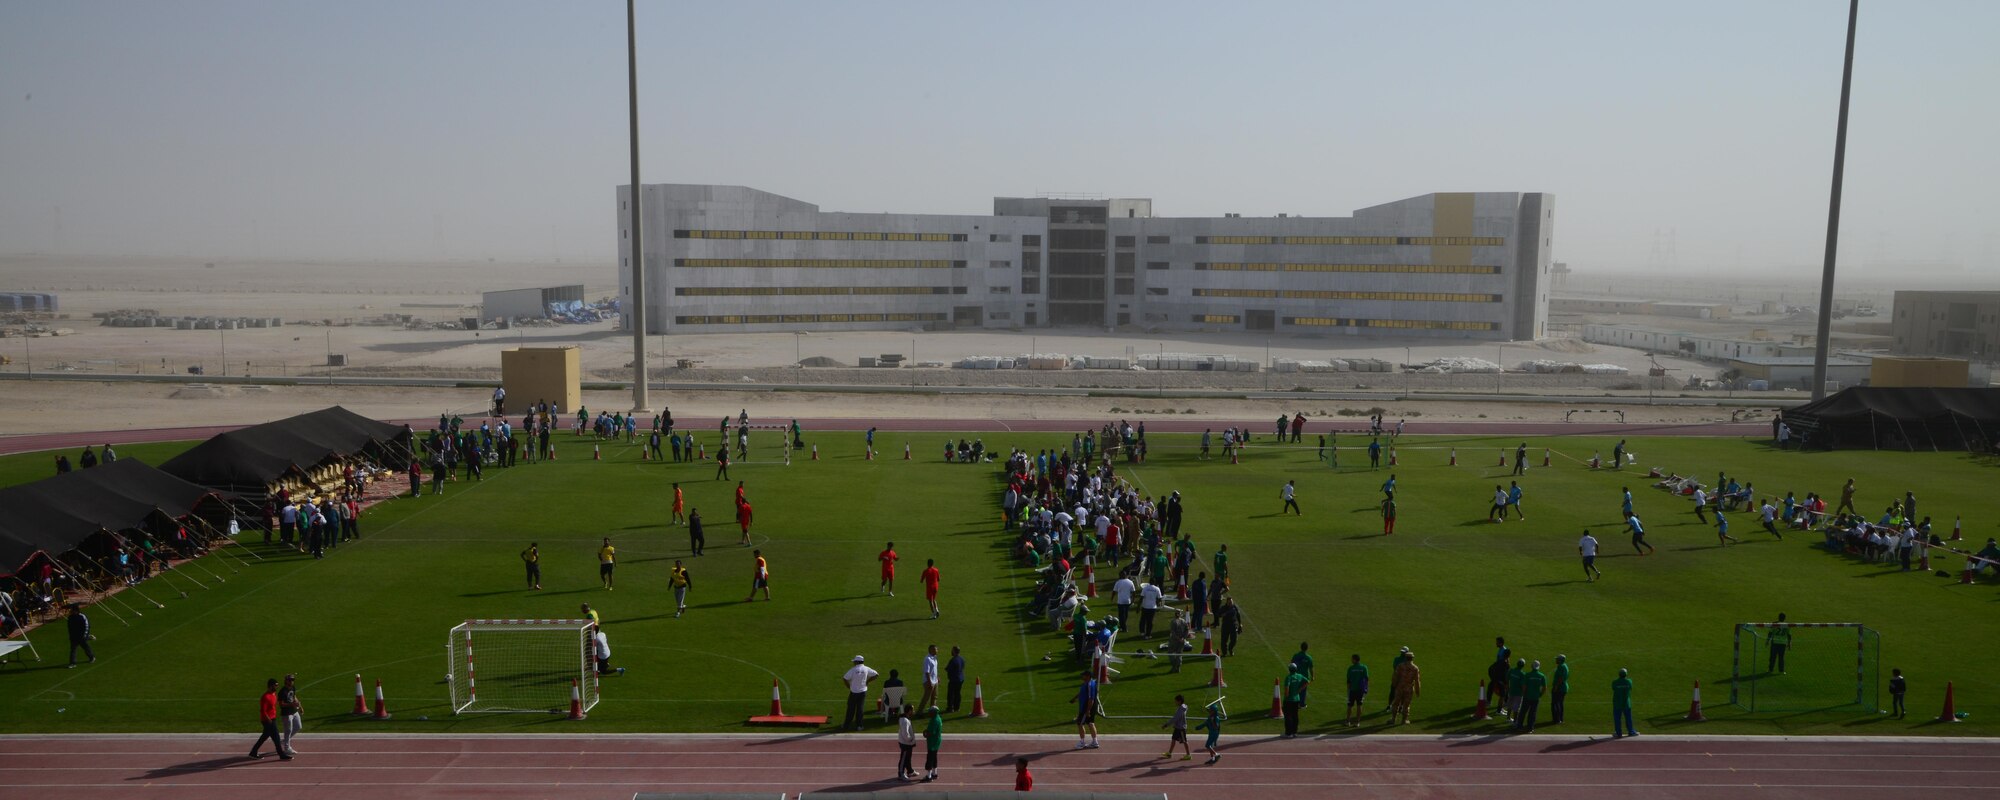 U.S. servicemembers and Qatar Emiri Air Force members play various sports during Qatar National Sports Day, Feb. 10, 2015, at Al Udeid Air Base, Qatar. More than 80 servicemembers teamed up to form basketball, soccer and volleyball teams to compete with the Qatar Emiri Air Force during their sports day. (U.S. Air Force photo by Senior Airman Kia Atkins)